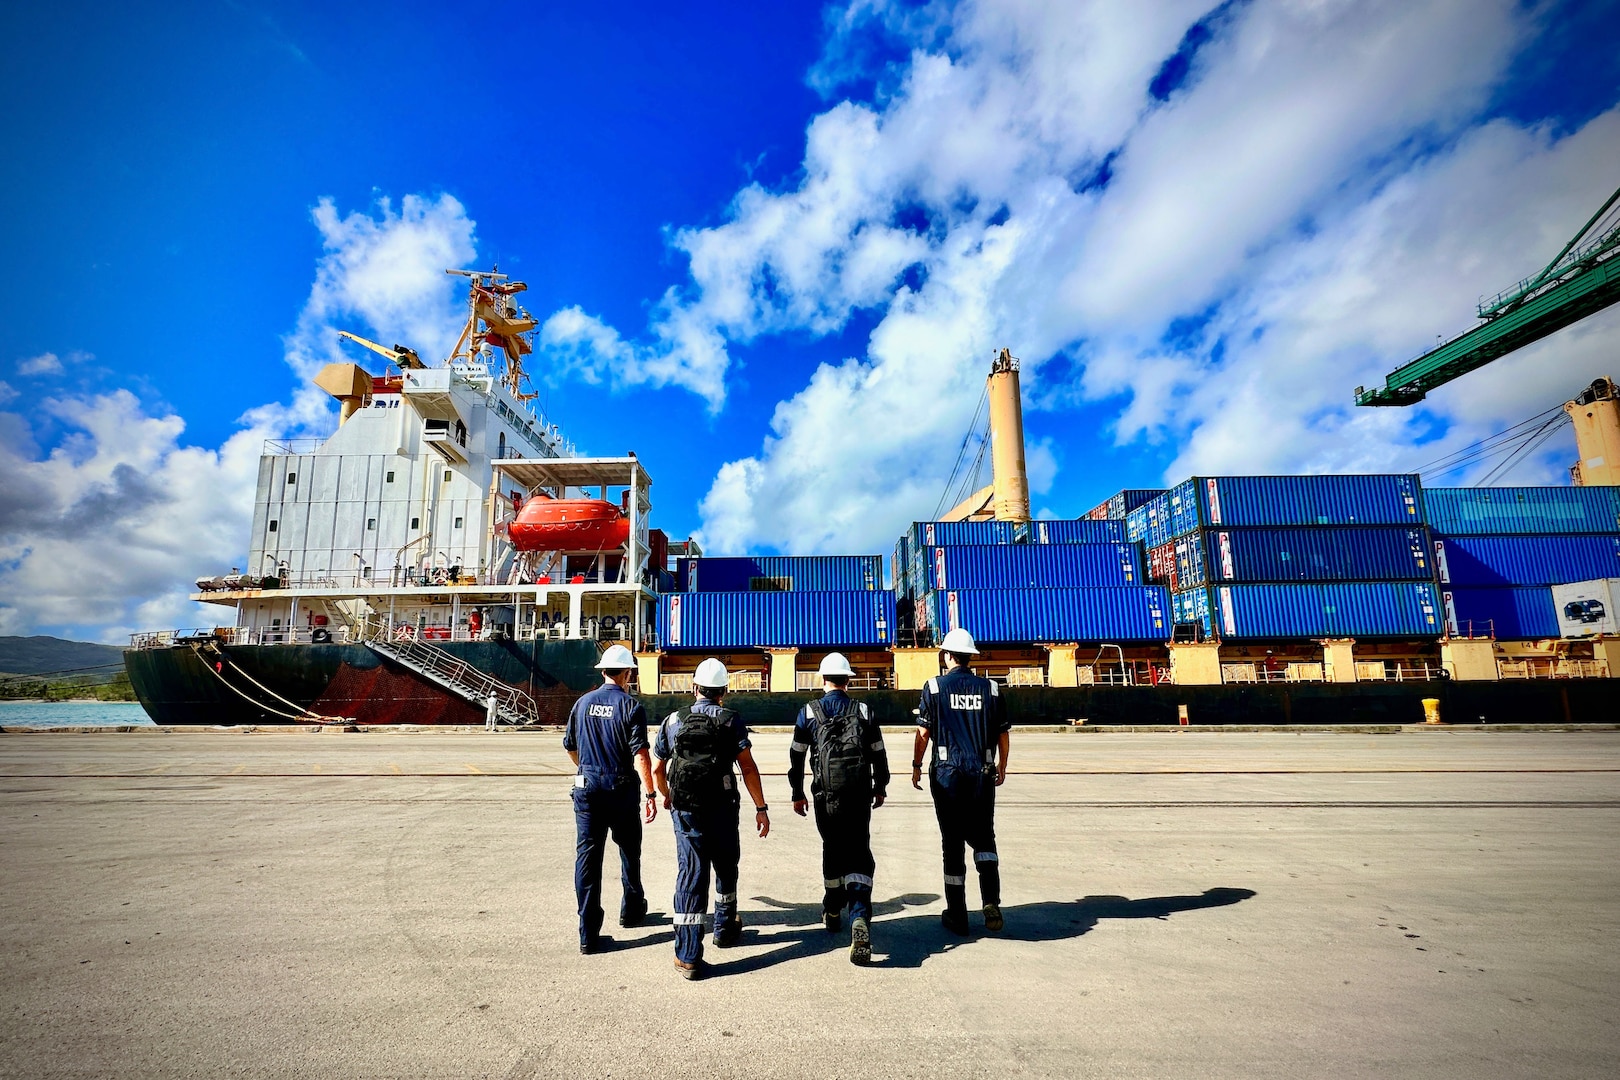 A U.S. Coast Guard Forces Micronesia Sector Guam team conducts a port state control examination on the 472-foot Singapore-flagged commercial cargo vessel Kota Raja in the Port of Guam on June 15, 2023.